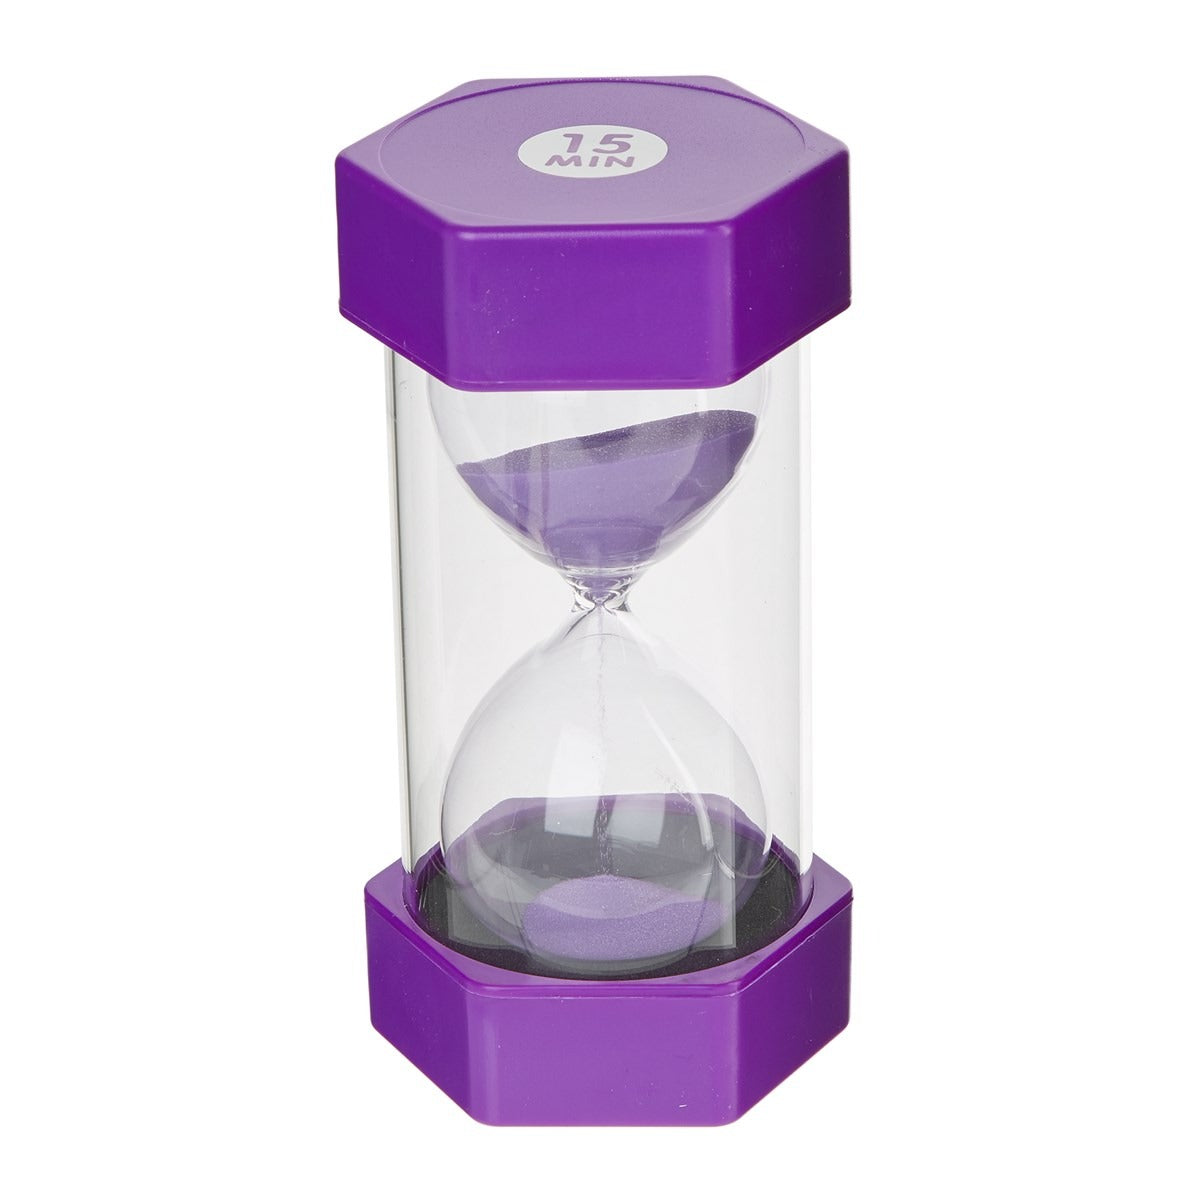 15 minutes sand timer, Introducing our virtually indestructible 15 Minute Sand Timer! Designed with durability in mind, this sand timer is perfect for use in classrooms, at home, or in any professional setting. The moulded end caps and thick wall surrounds ensure that this timer can withstand drops and bounces, making it a reliable choice for all your timing needs.For easy identification, the 15 minute sand timer is colour coded and has the time clearly listed on top. This feature allows for quick and accur